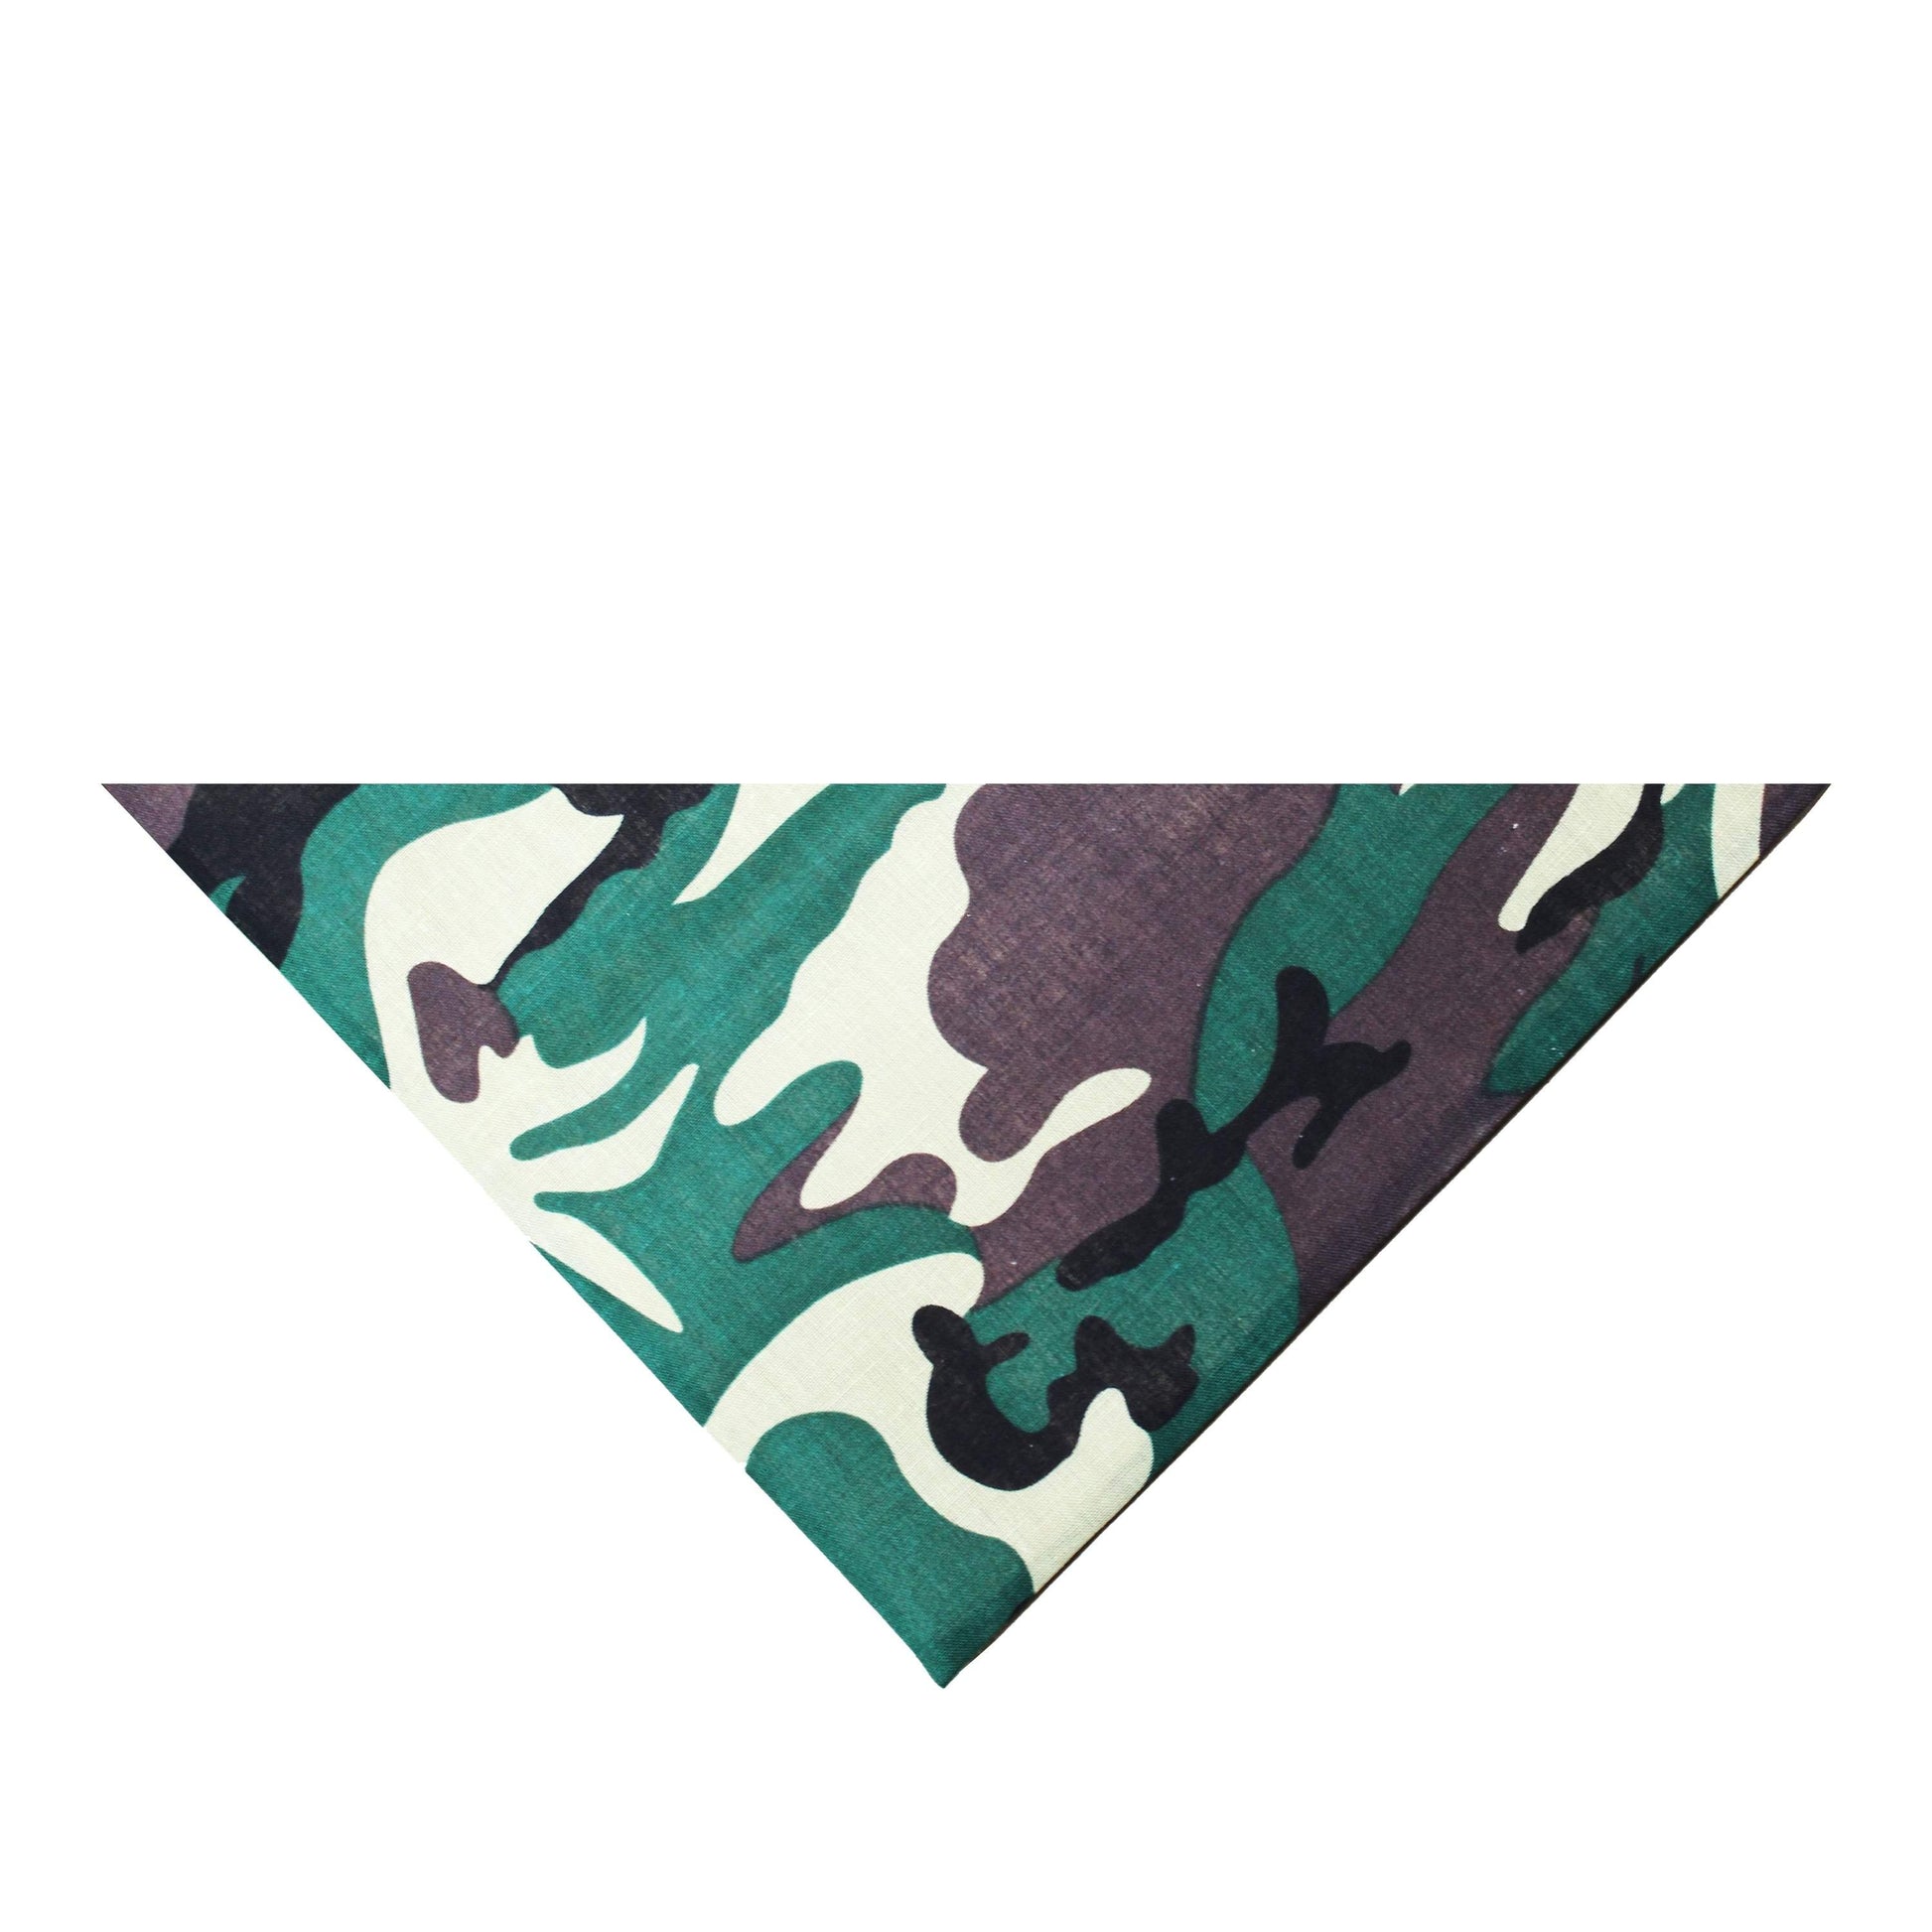 Pack of 8 Triangle Bandanas - Solid Colors and Polyester - 30 in x 20 in x 20 in